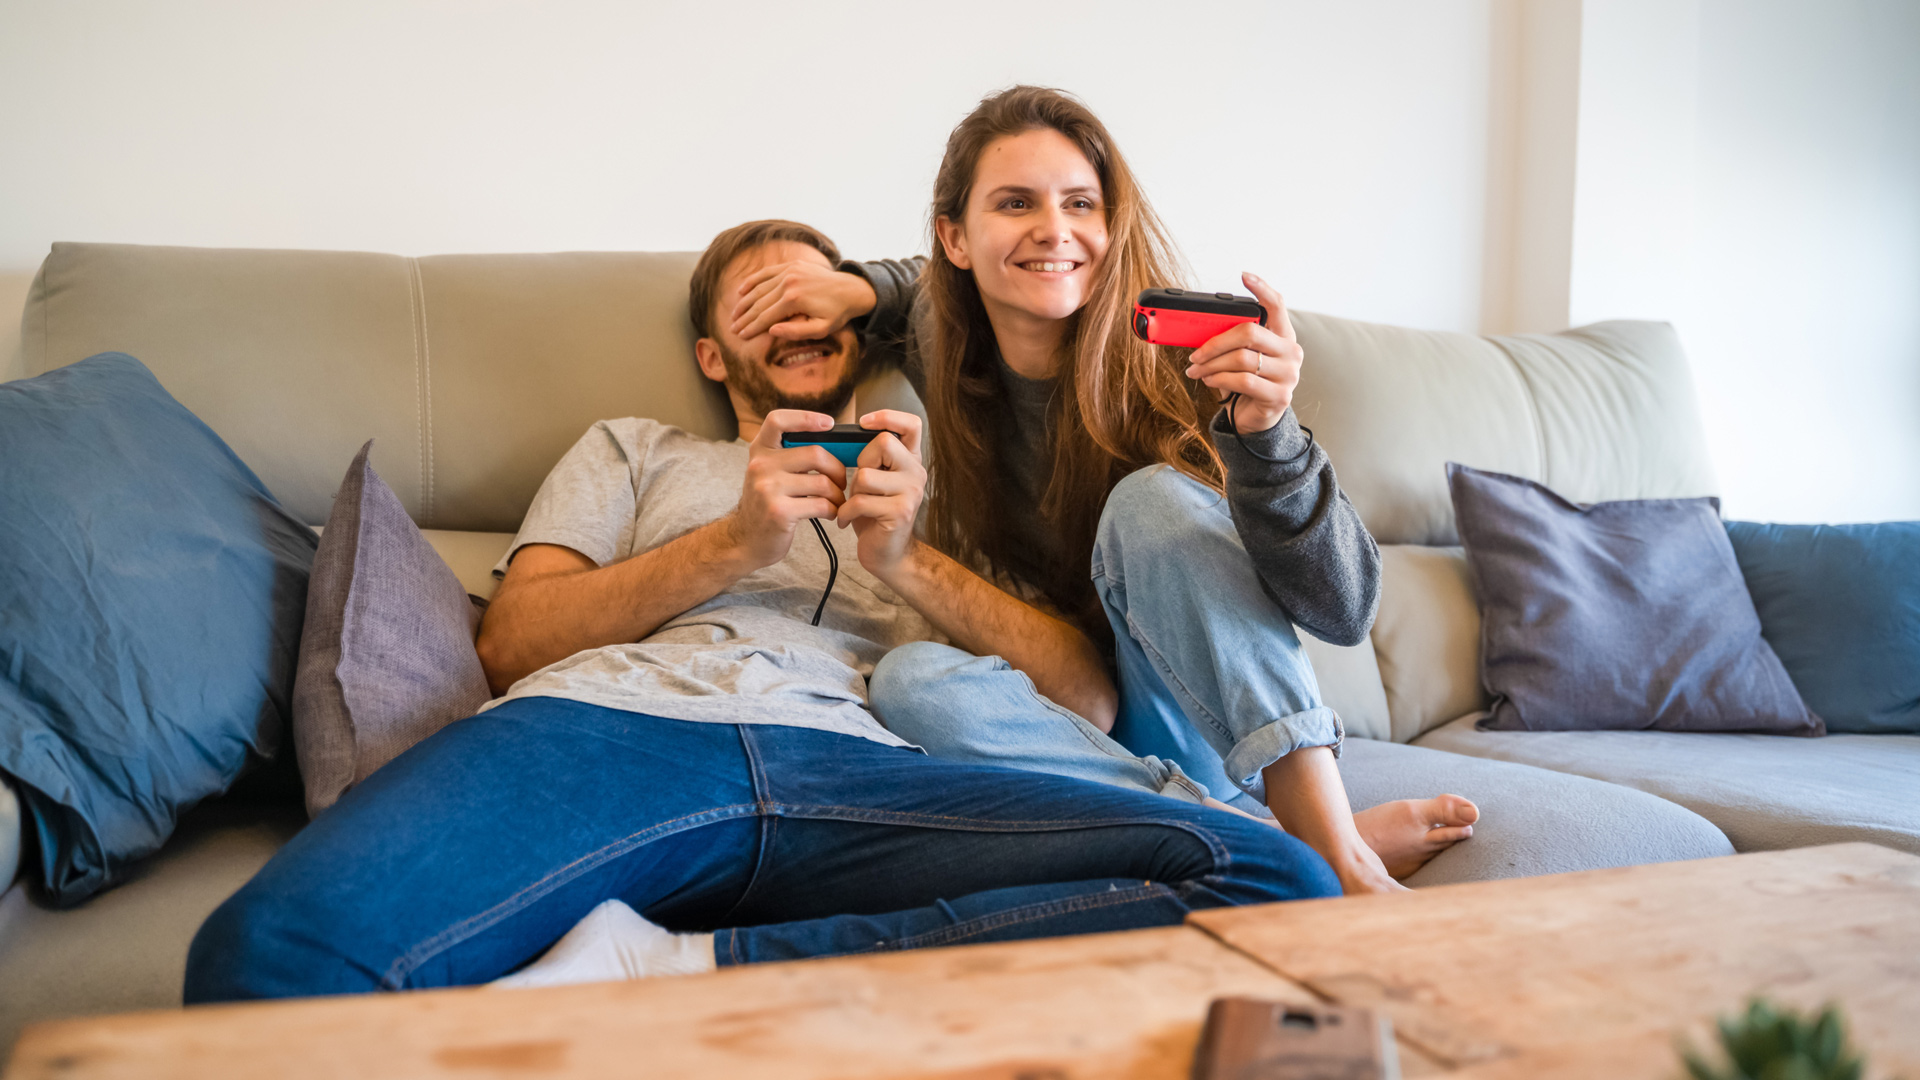 Man and woman sitting on a couch. They are both holding controllers and the woman is covering the man's eyes with her hand.